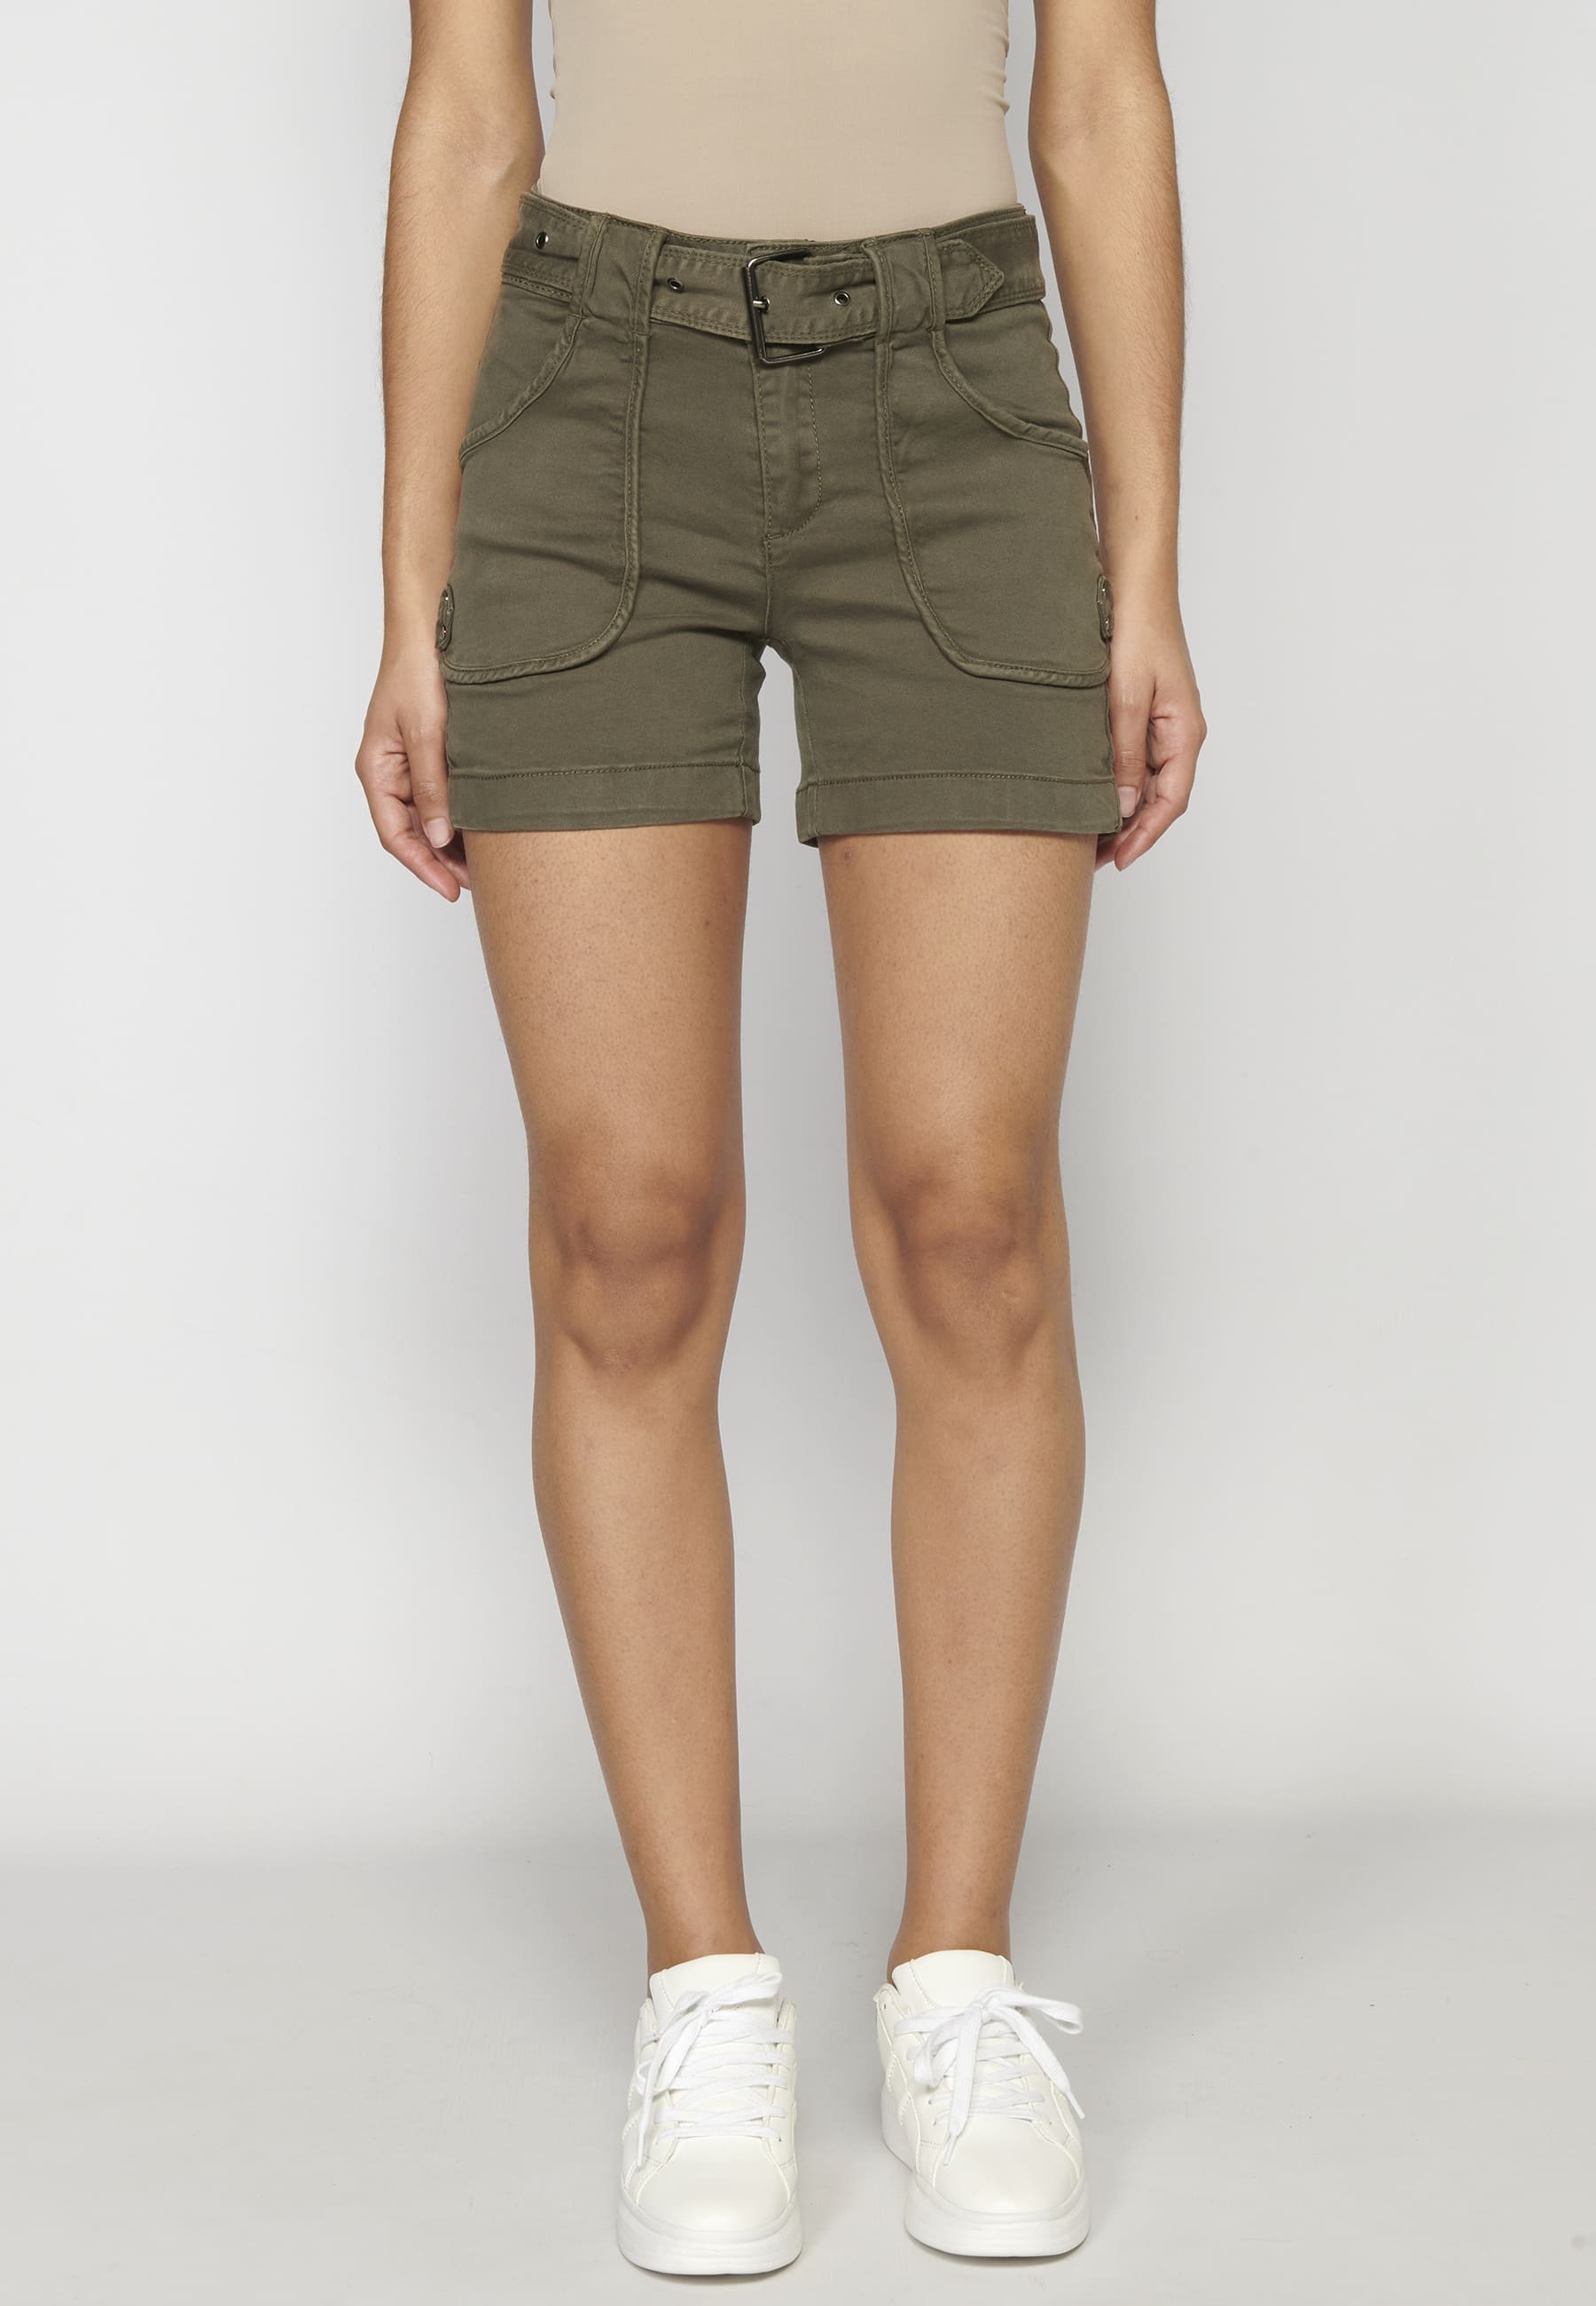 Khaki shorts with button and belt for Woman